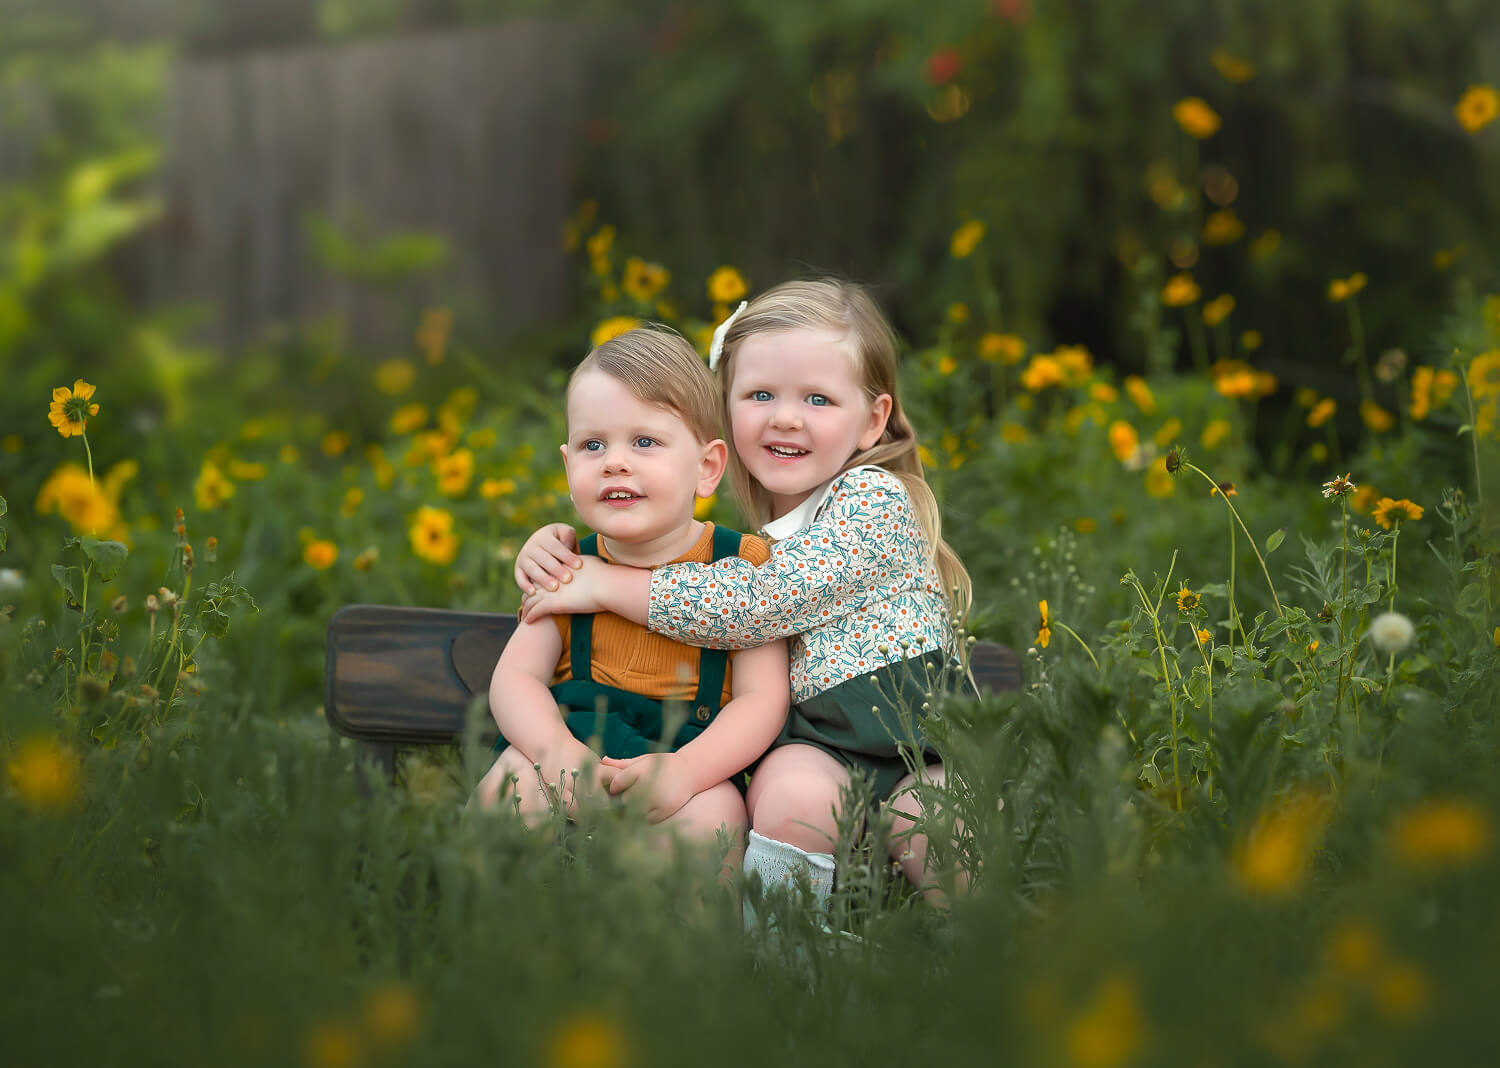 Perth Sibling Portraits in a gorgeous Perth location with yellow flowers during spring photoshoot